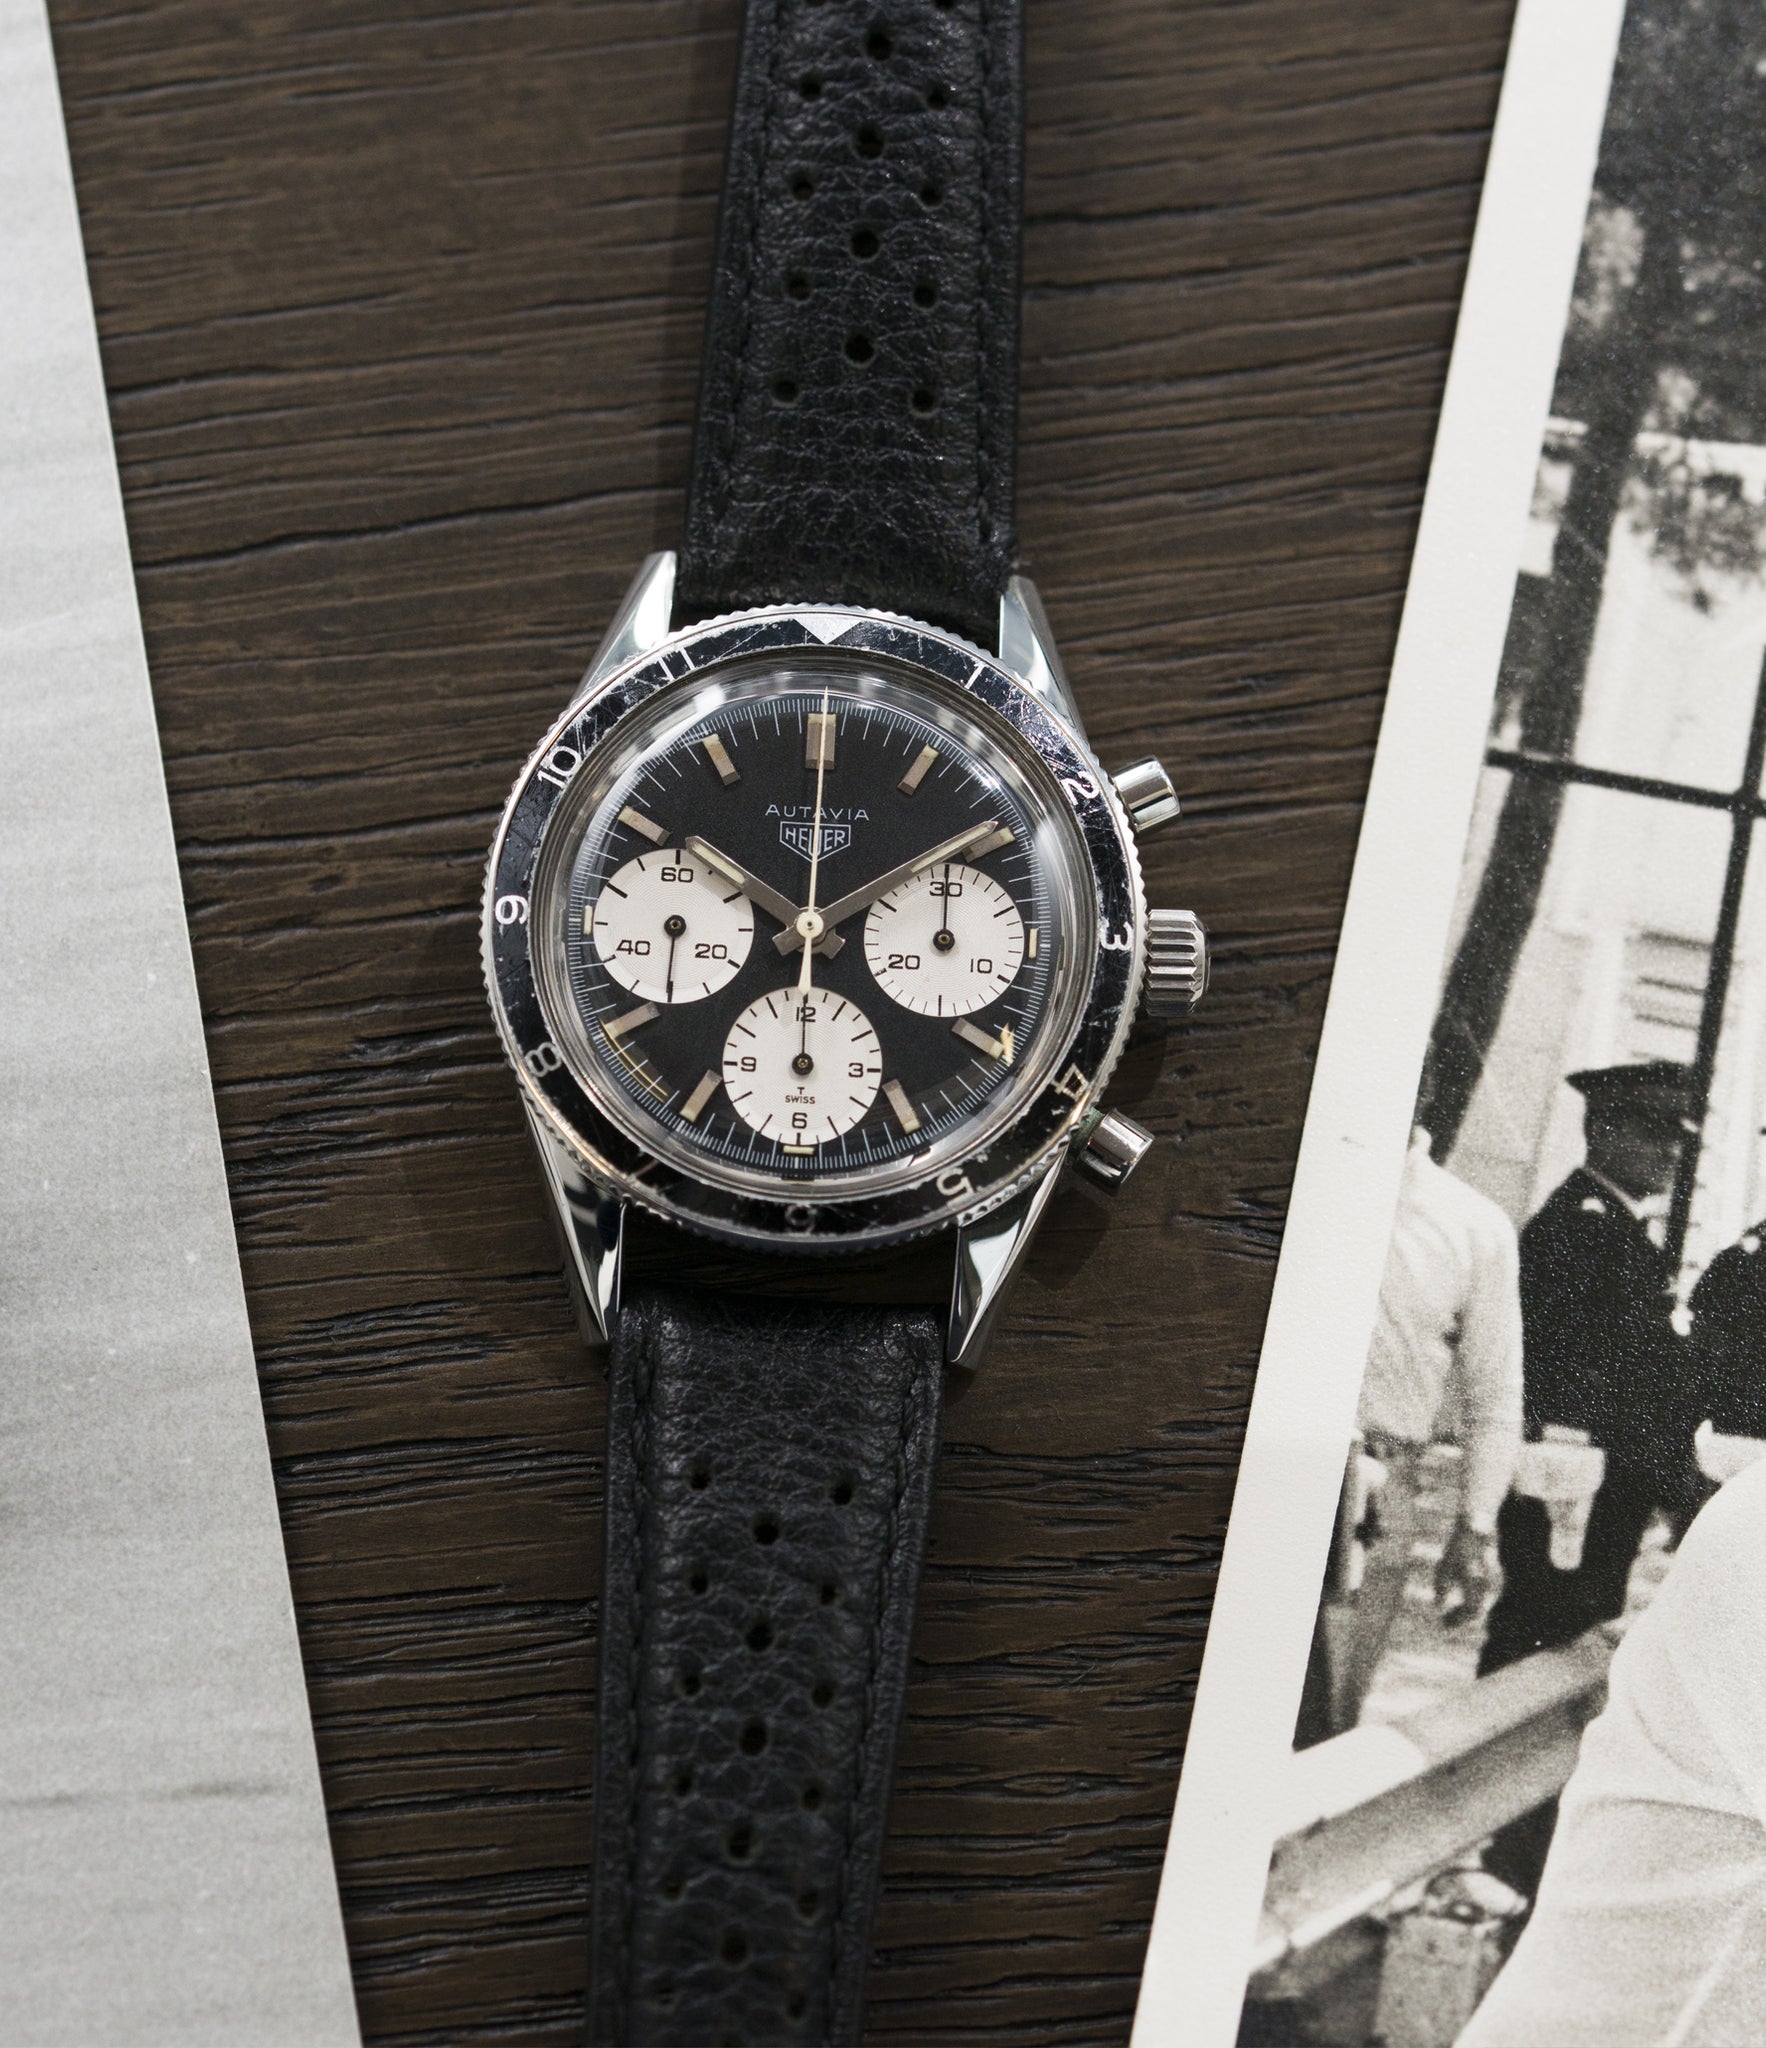 for sale Heuer Autavia Rindt 2446 Valjoux 72 manual-winding steel sport chronograph watch for sale online at A Collected Man London UK vintage rare watch specialist